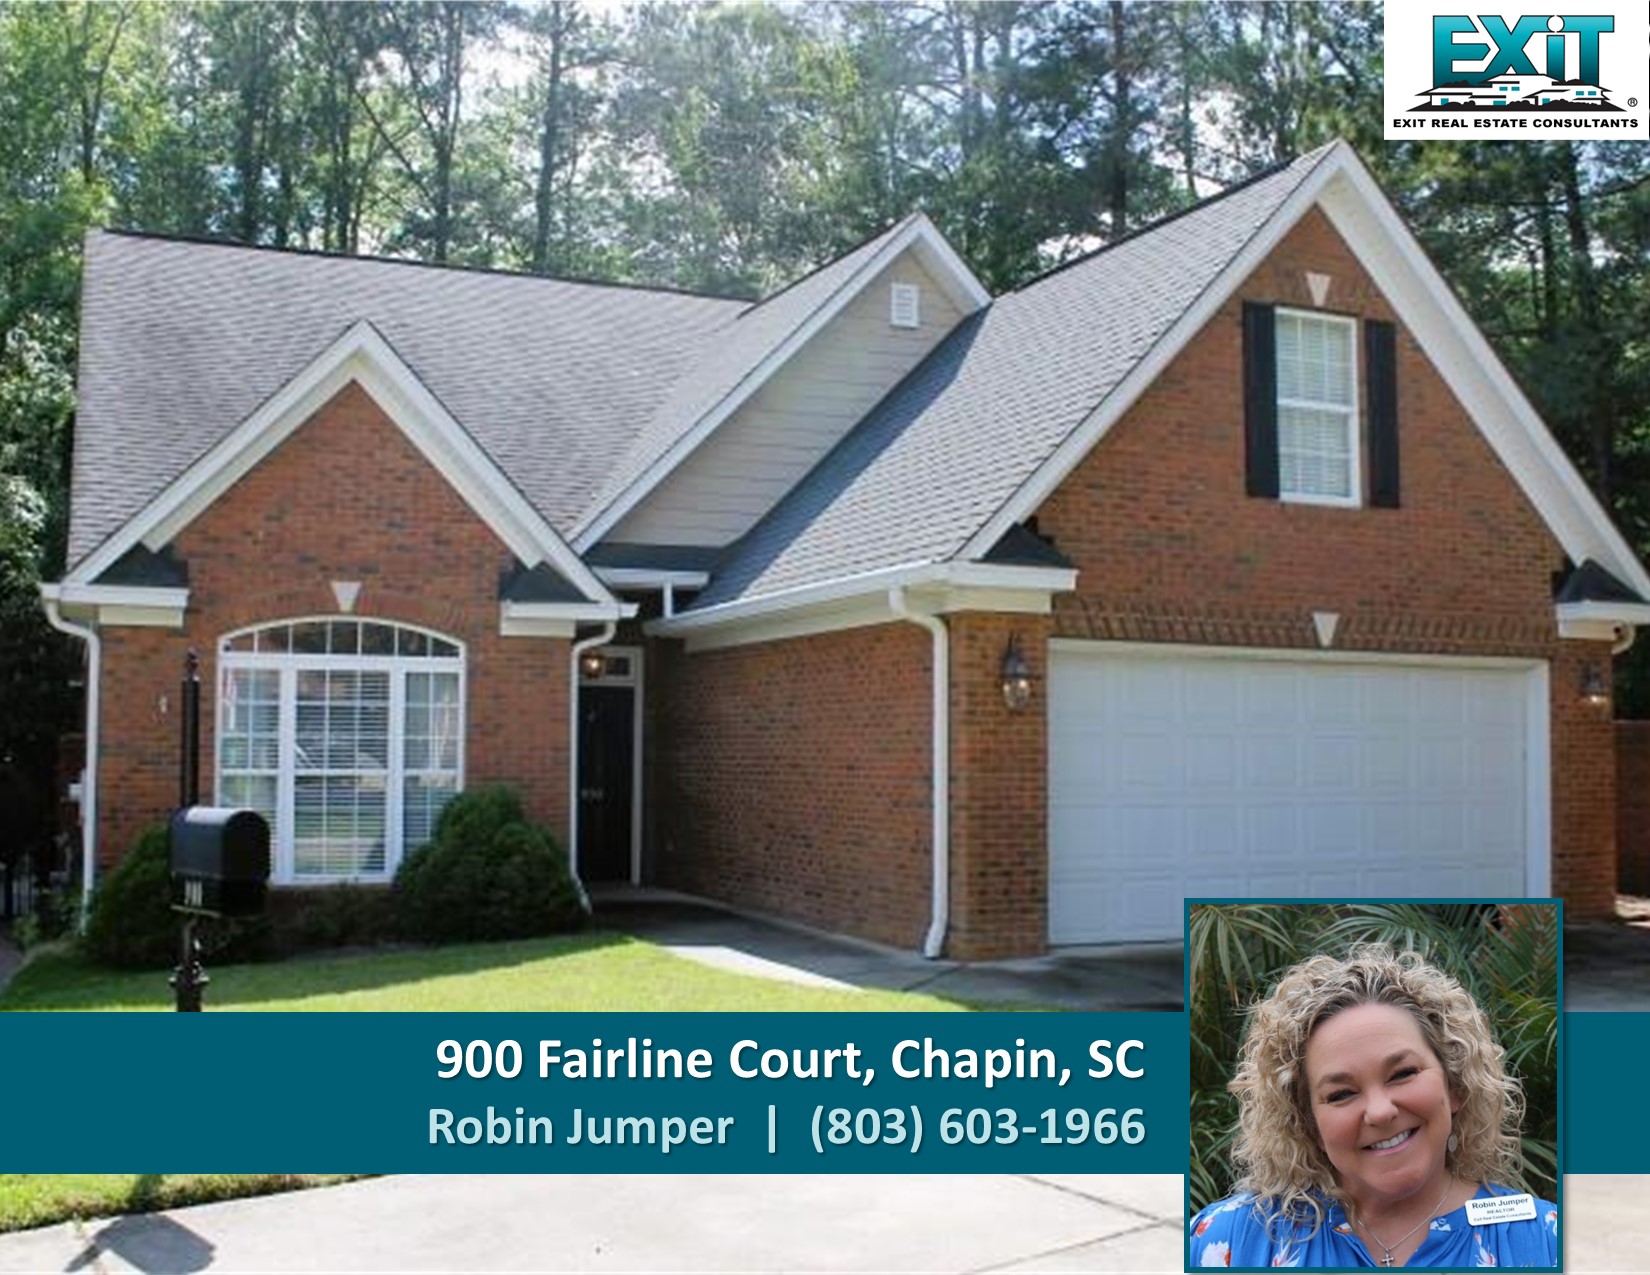 Just listed in Eagles Rest - Chapin